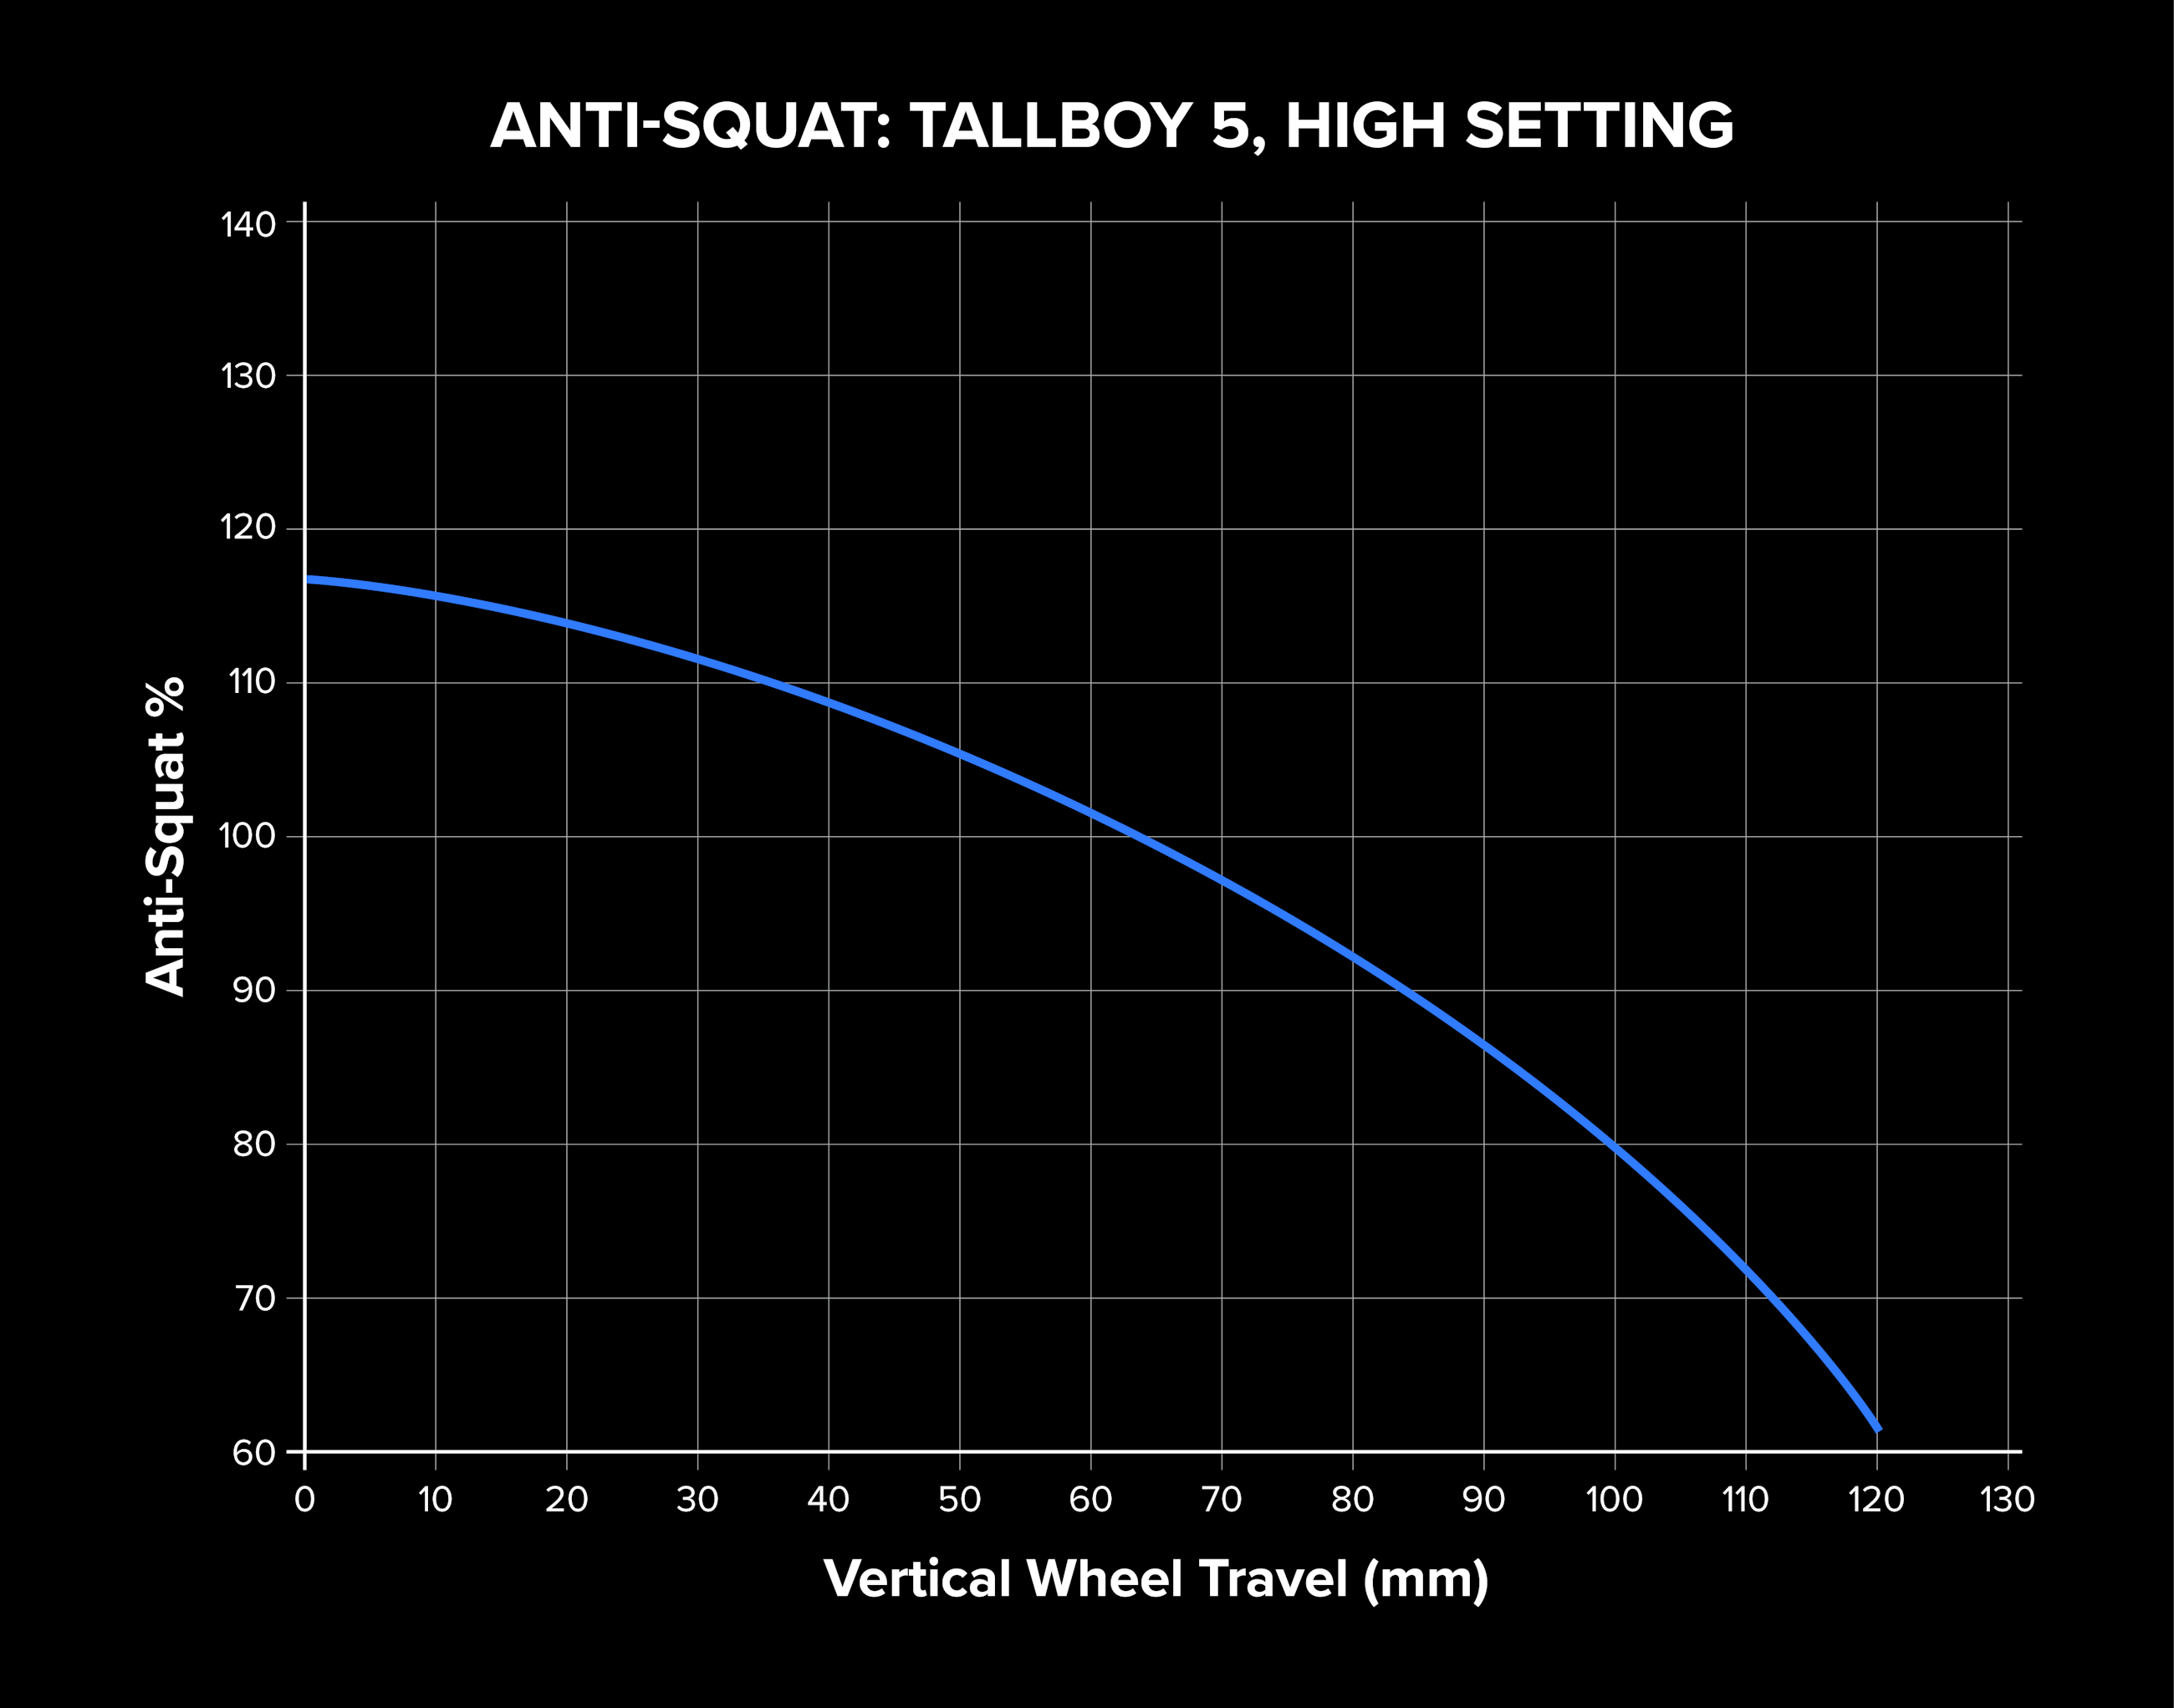 A graph showing Anti-squat on the Tallboy 5